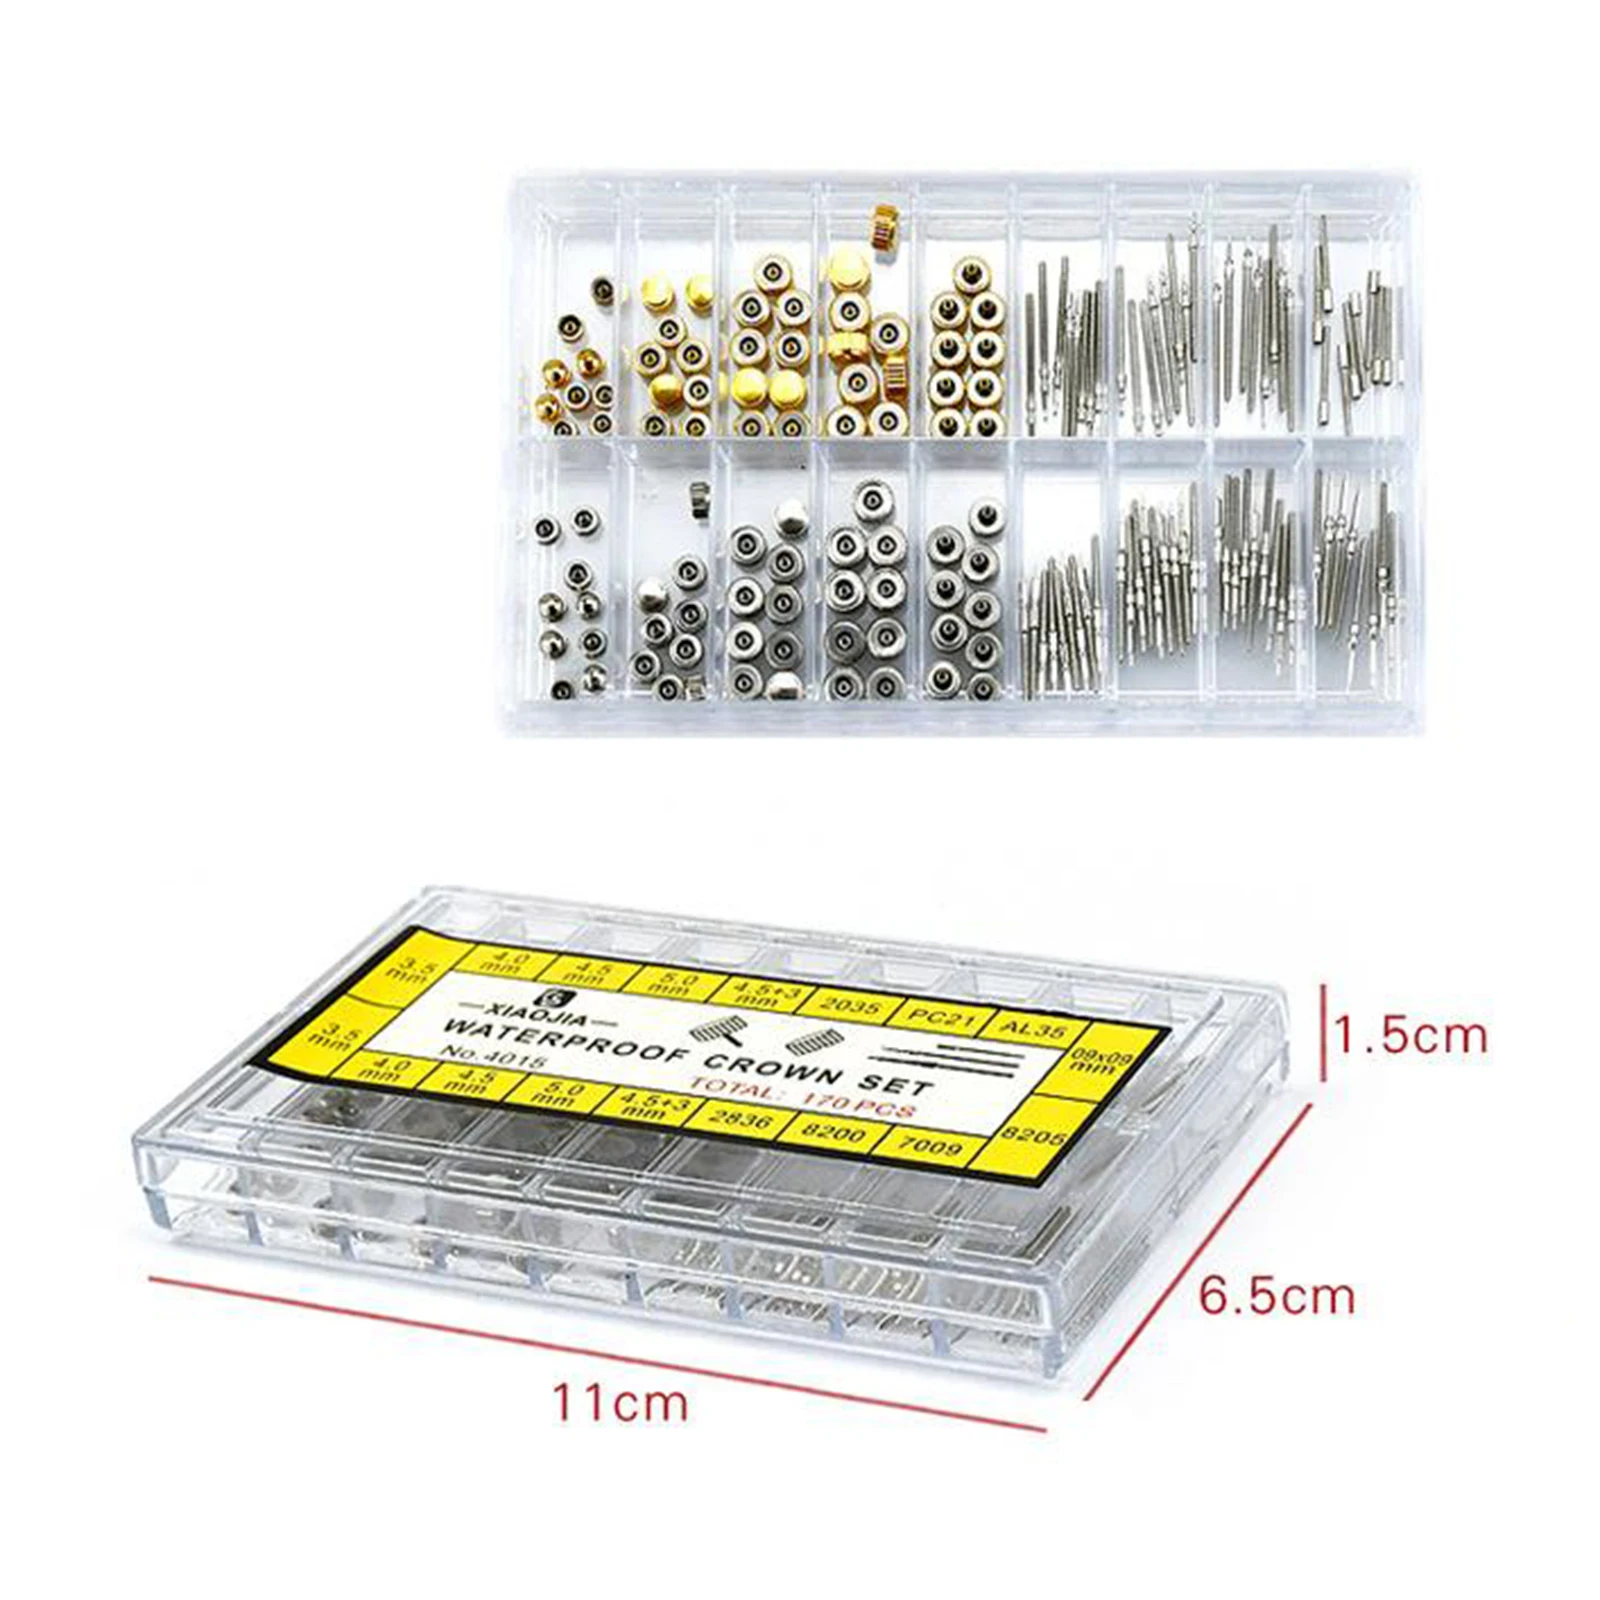 Waterproof Stainless Steel Watch Crown Link Pins Spring Bar Set Replaces for Watchmakers